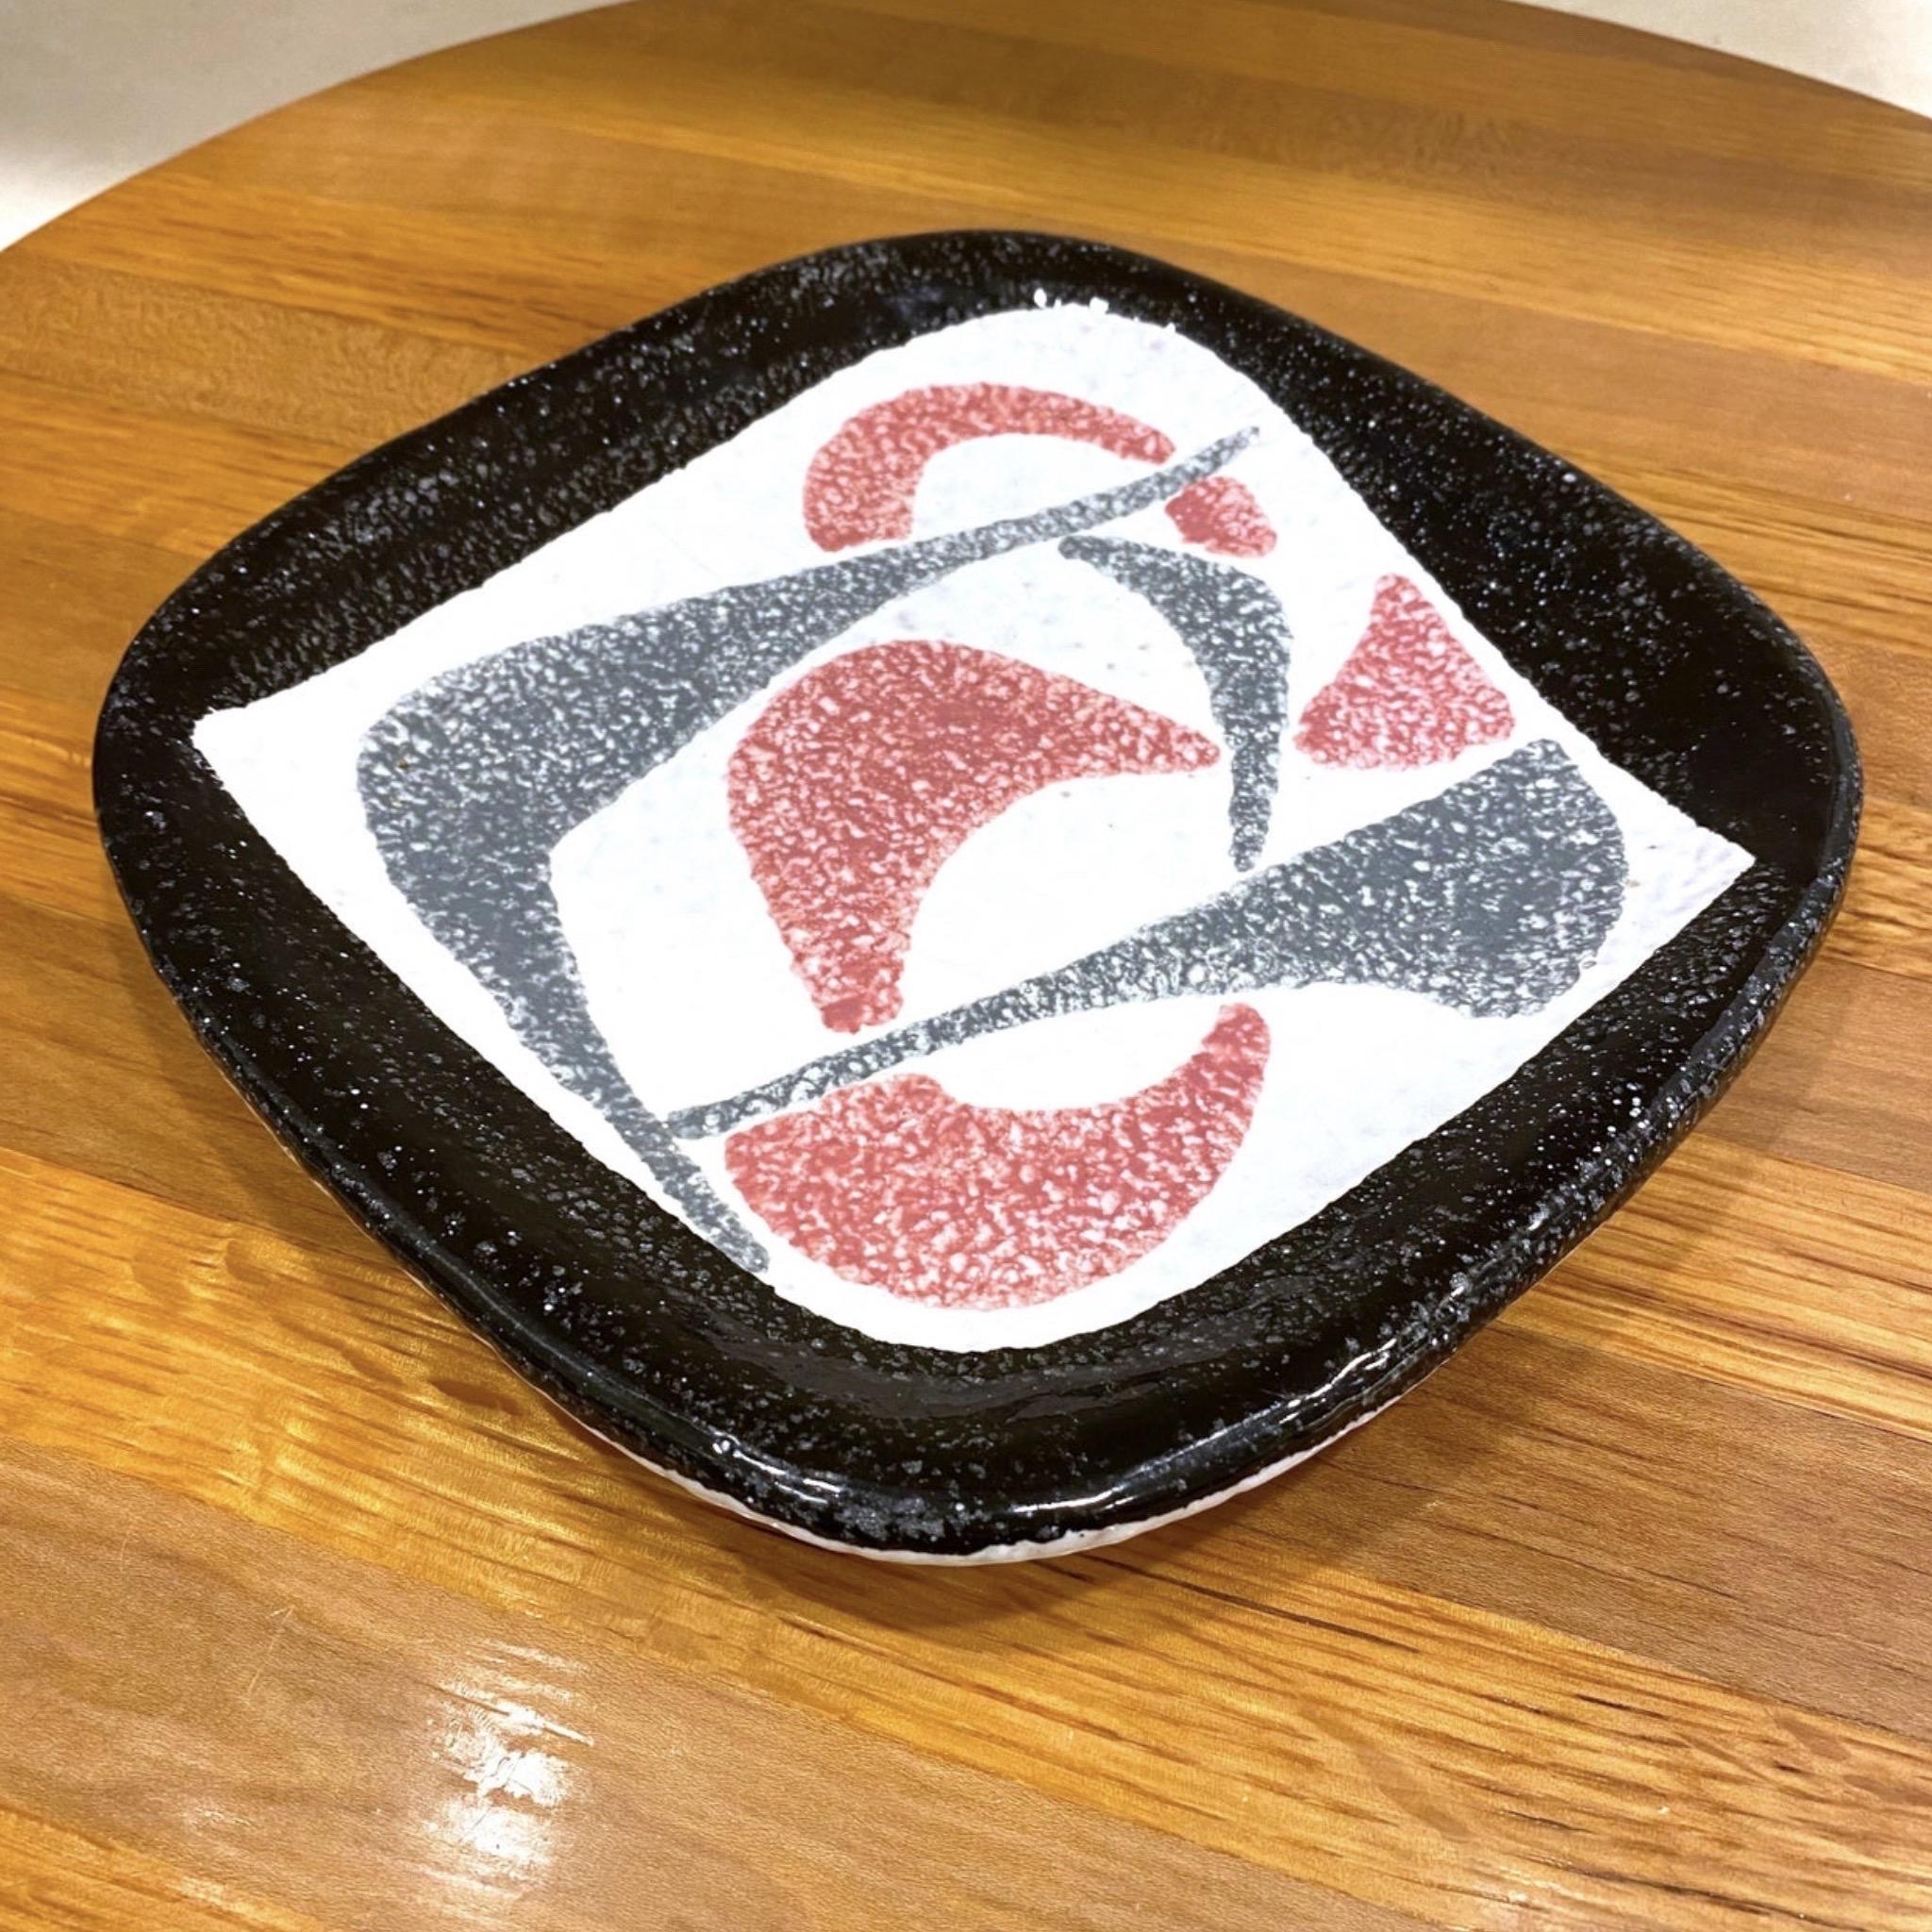 A fantastic ceramic atomic style plate with black and gray and pink boomerangs. The square plate has rounded edges. Marked Italy on the bottom. In the style of Fratelli Fanciullacci.